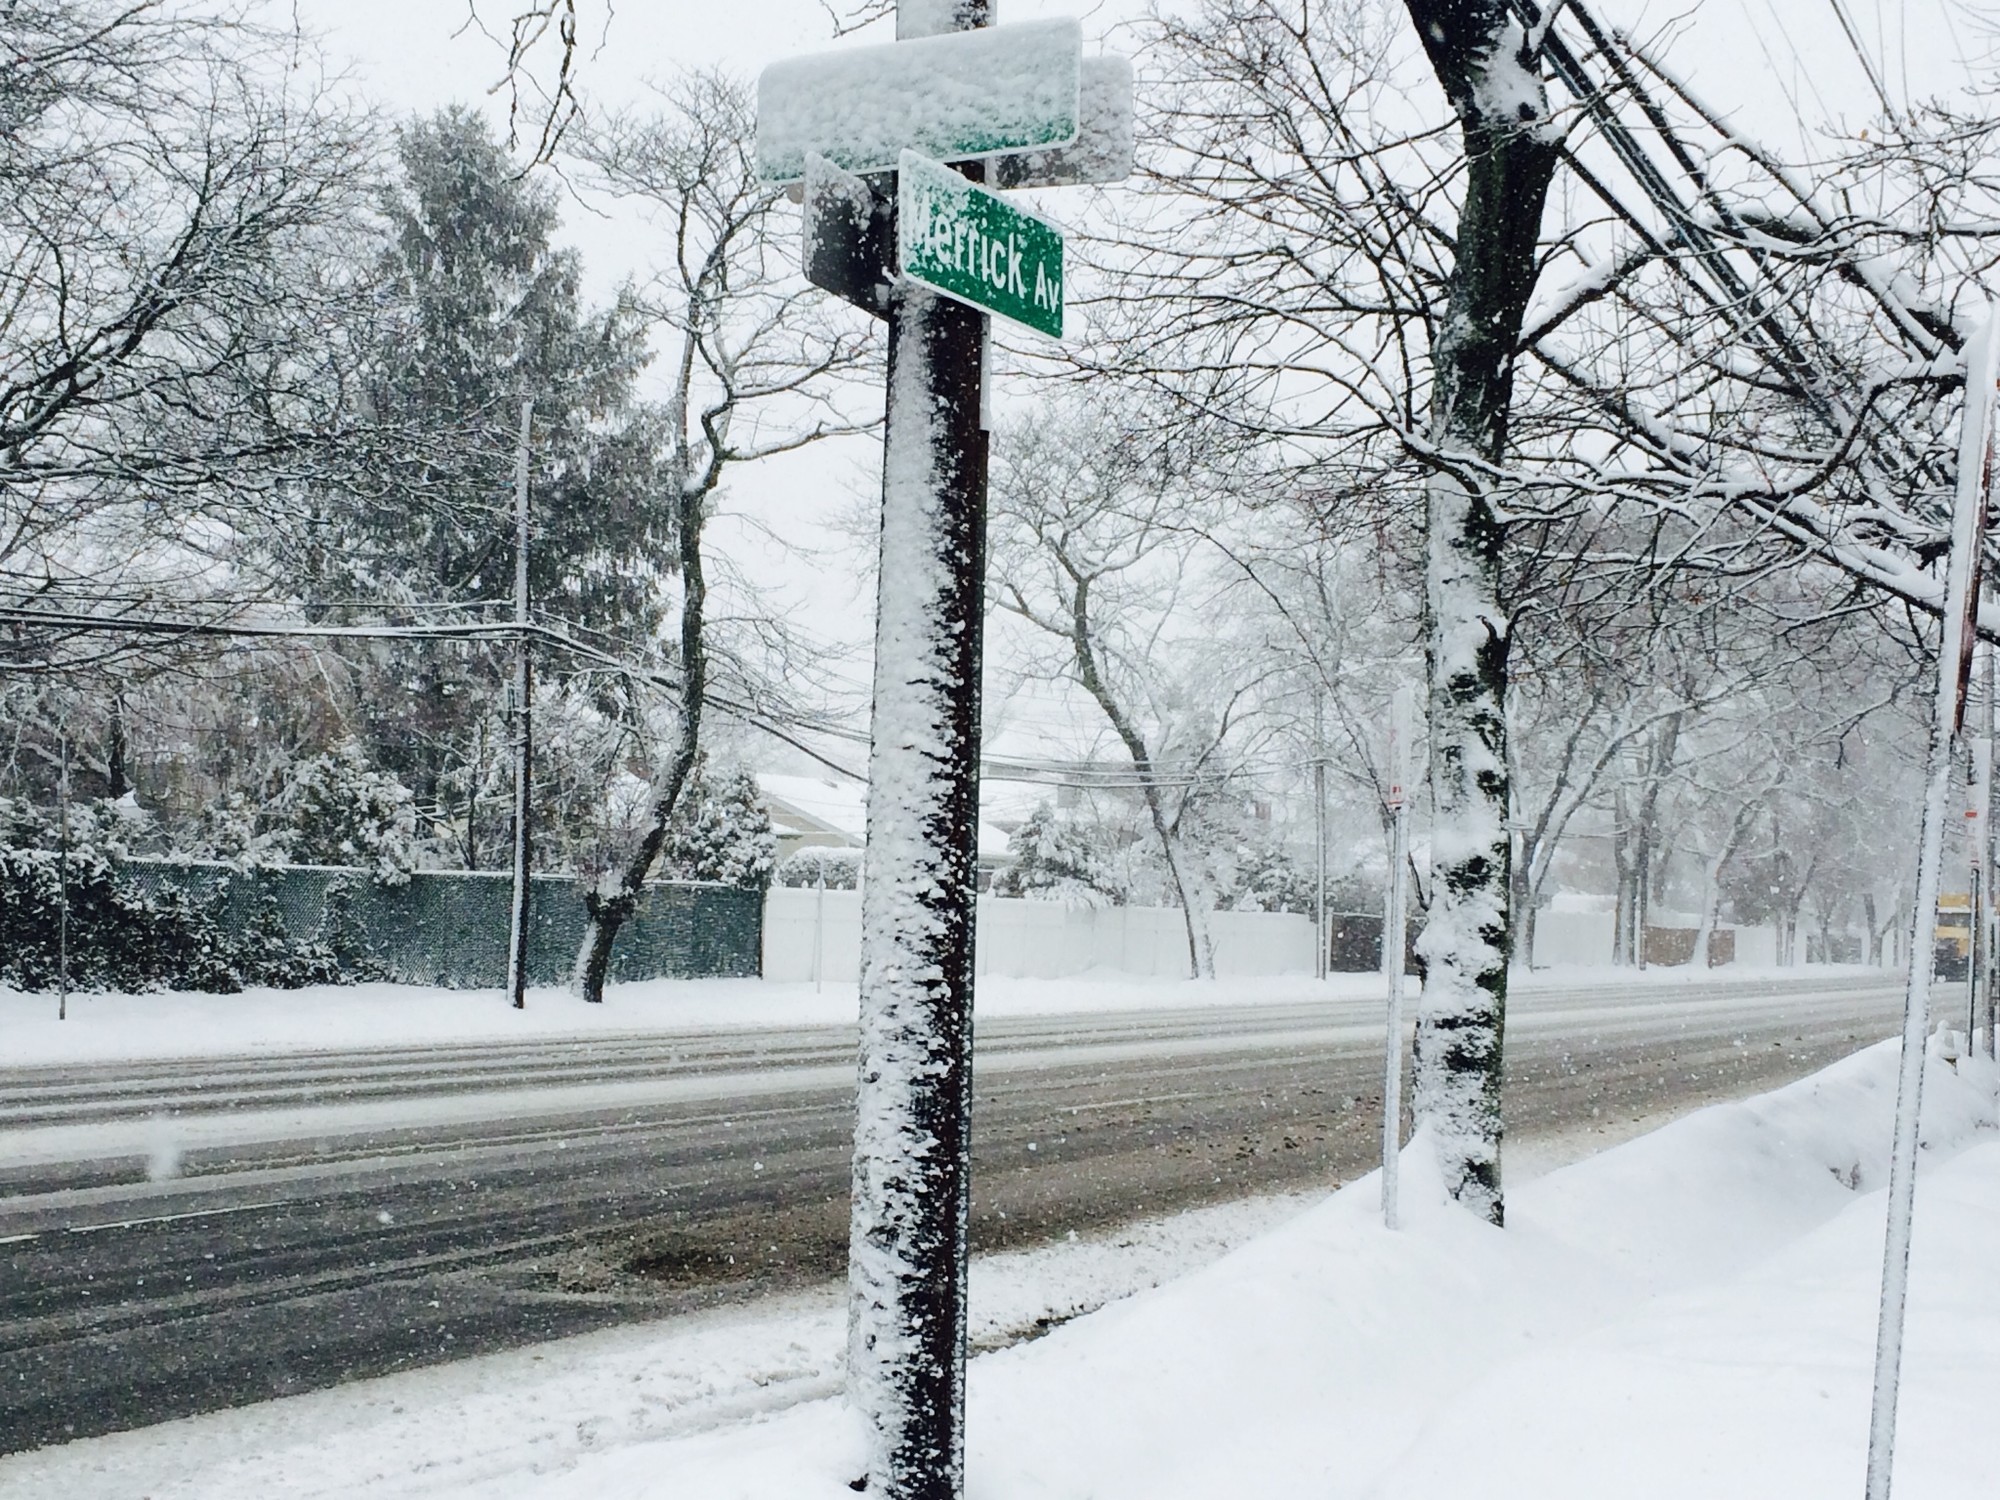 Snowfall made it difficult to read this street sign on Wilson Road, at Merrick Avenue.